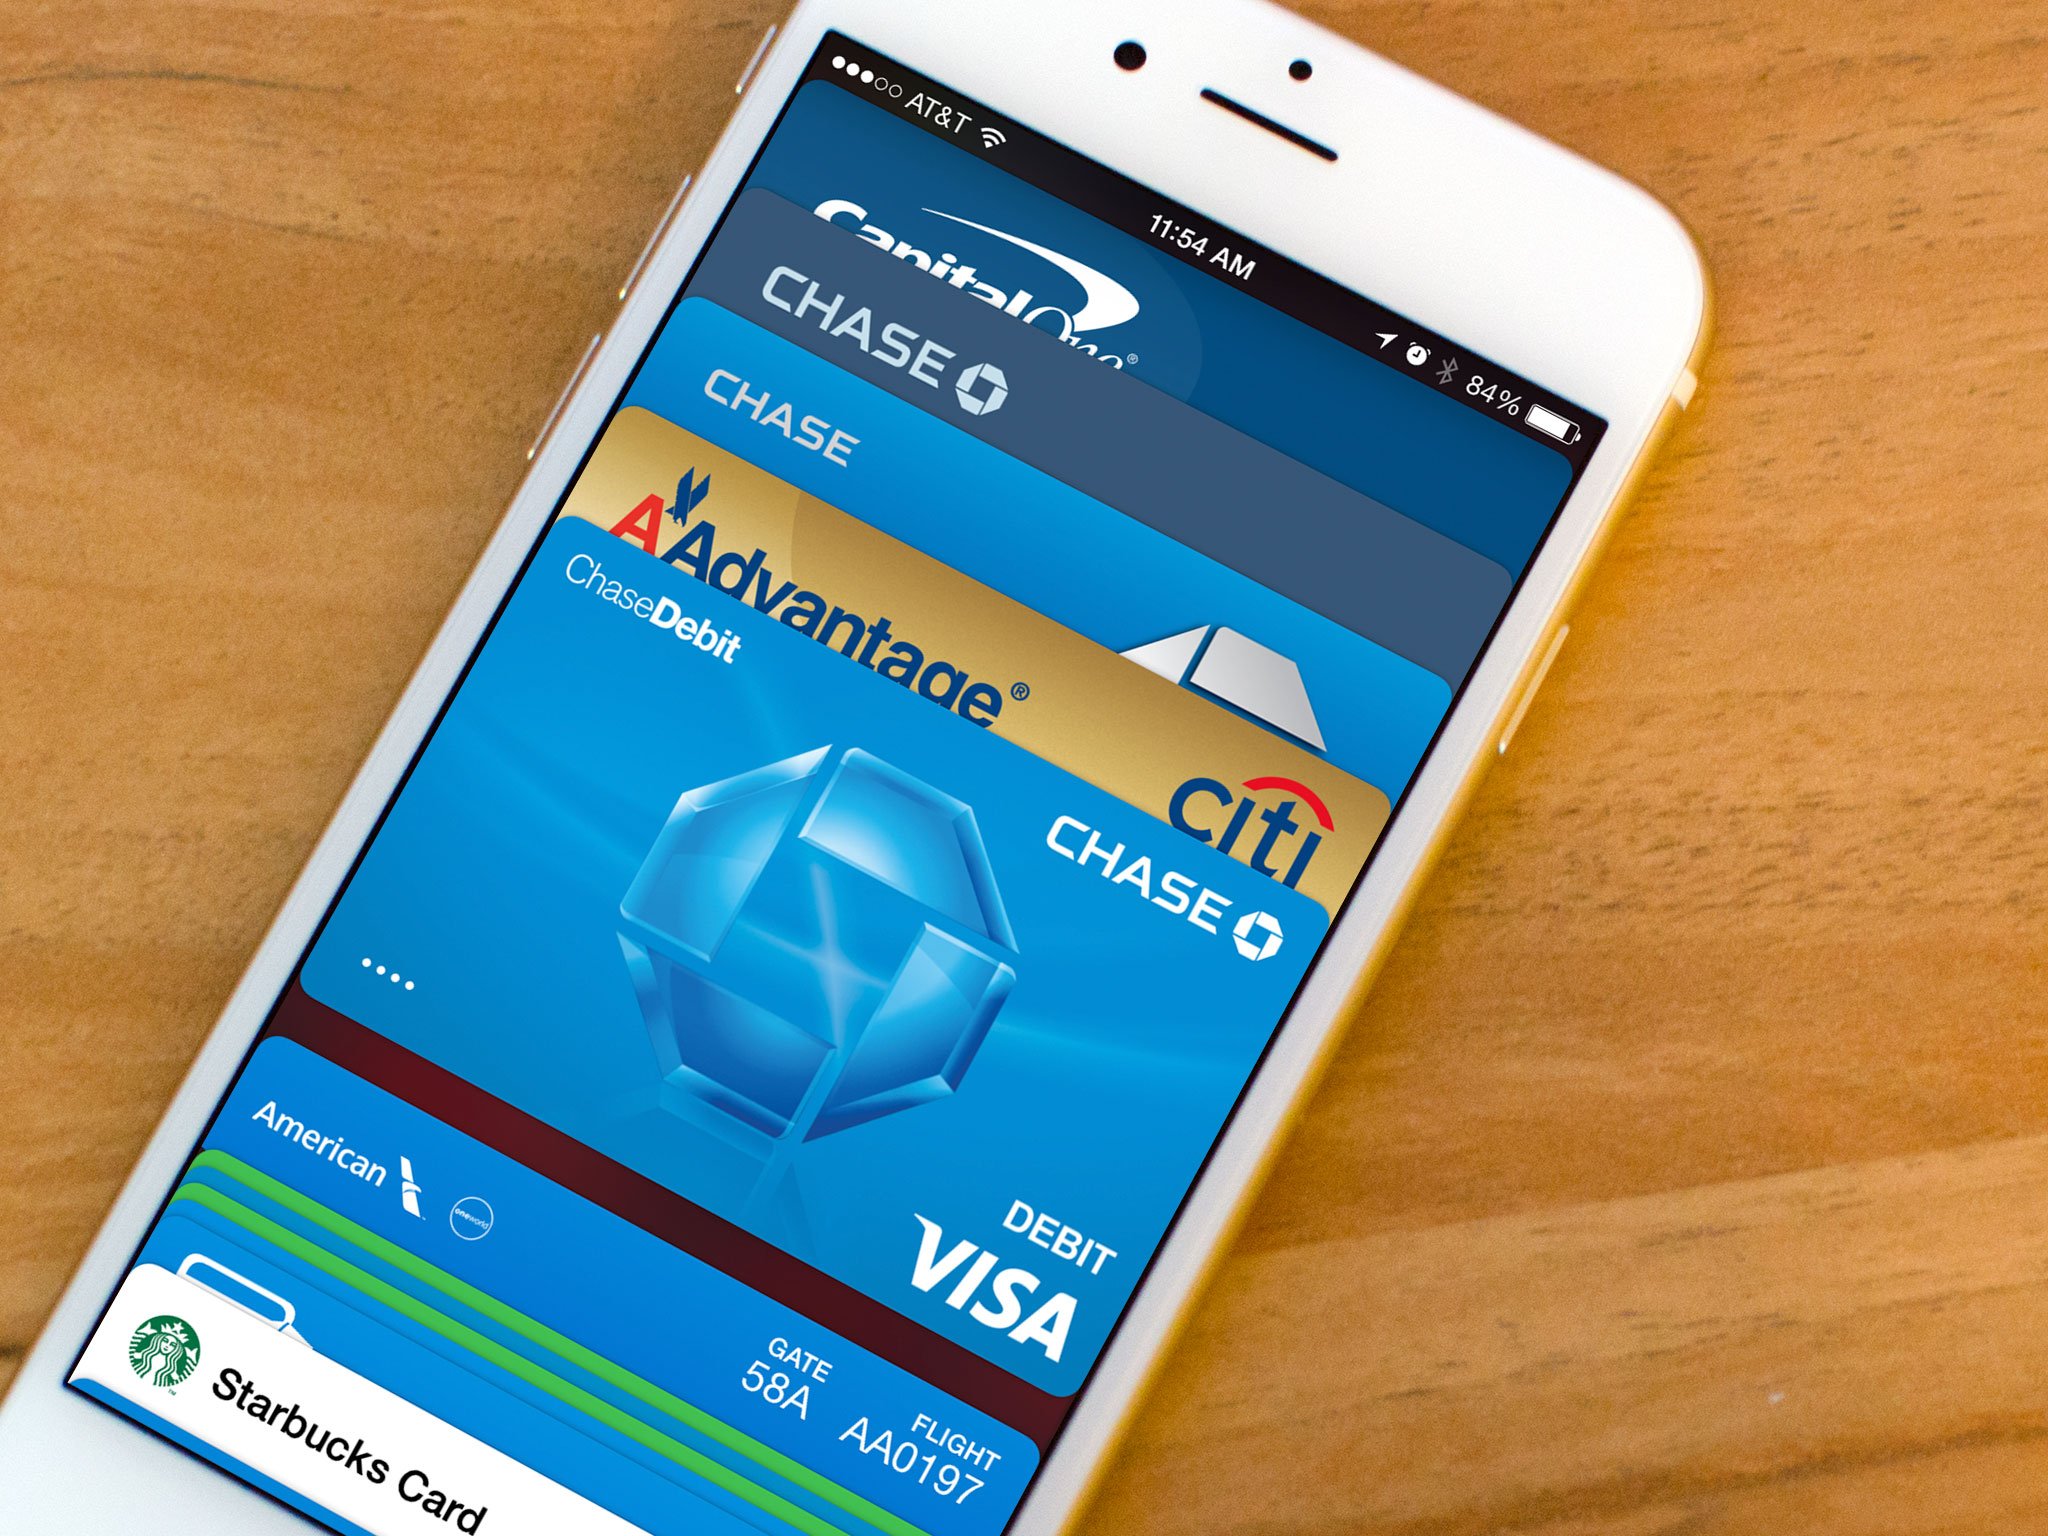 Chevron to bring Apple Pay to its gas pumps in 2015